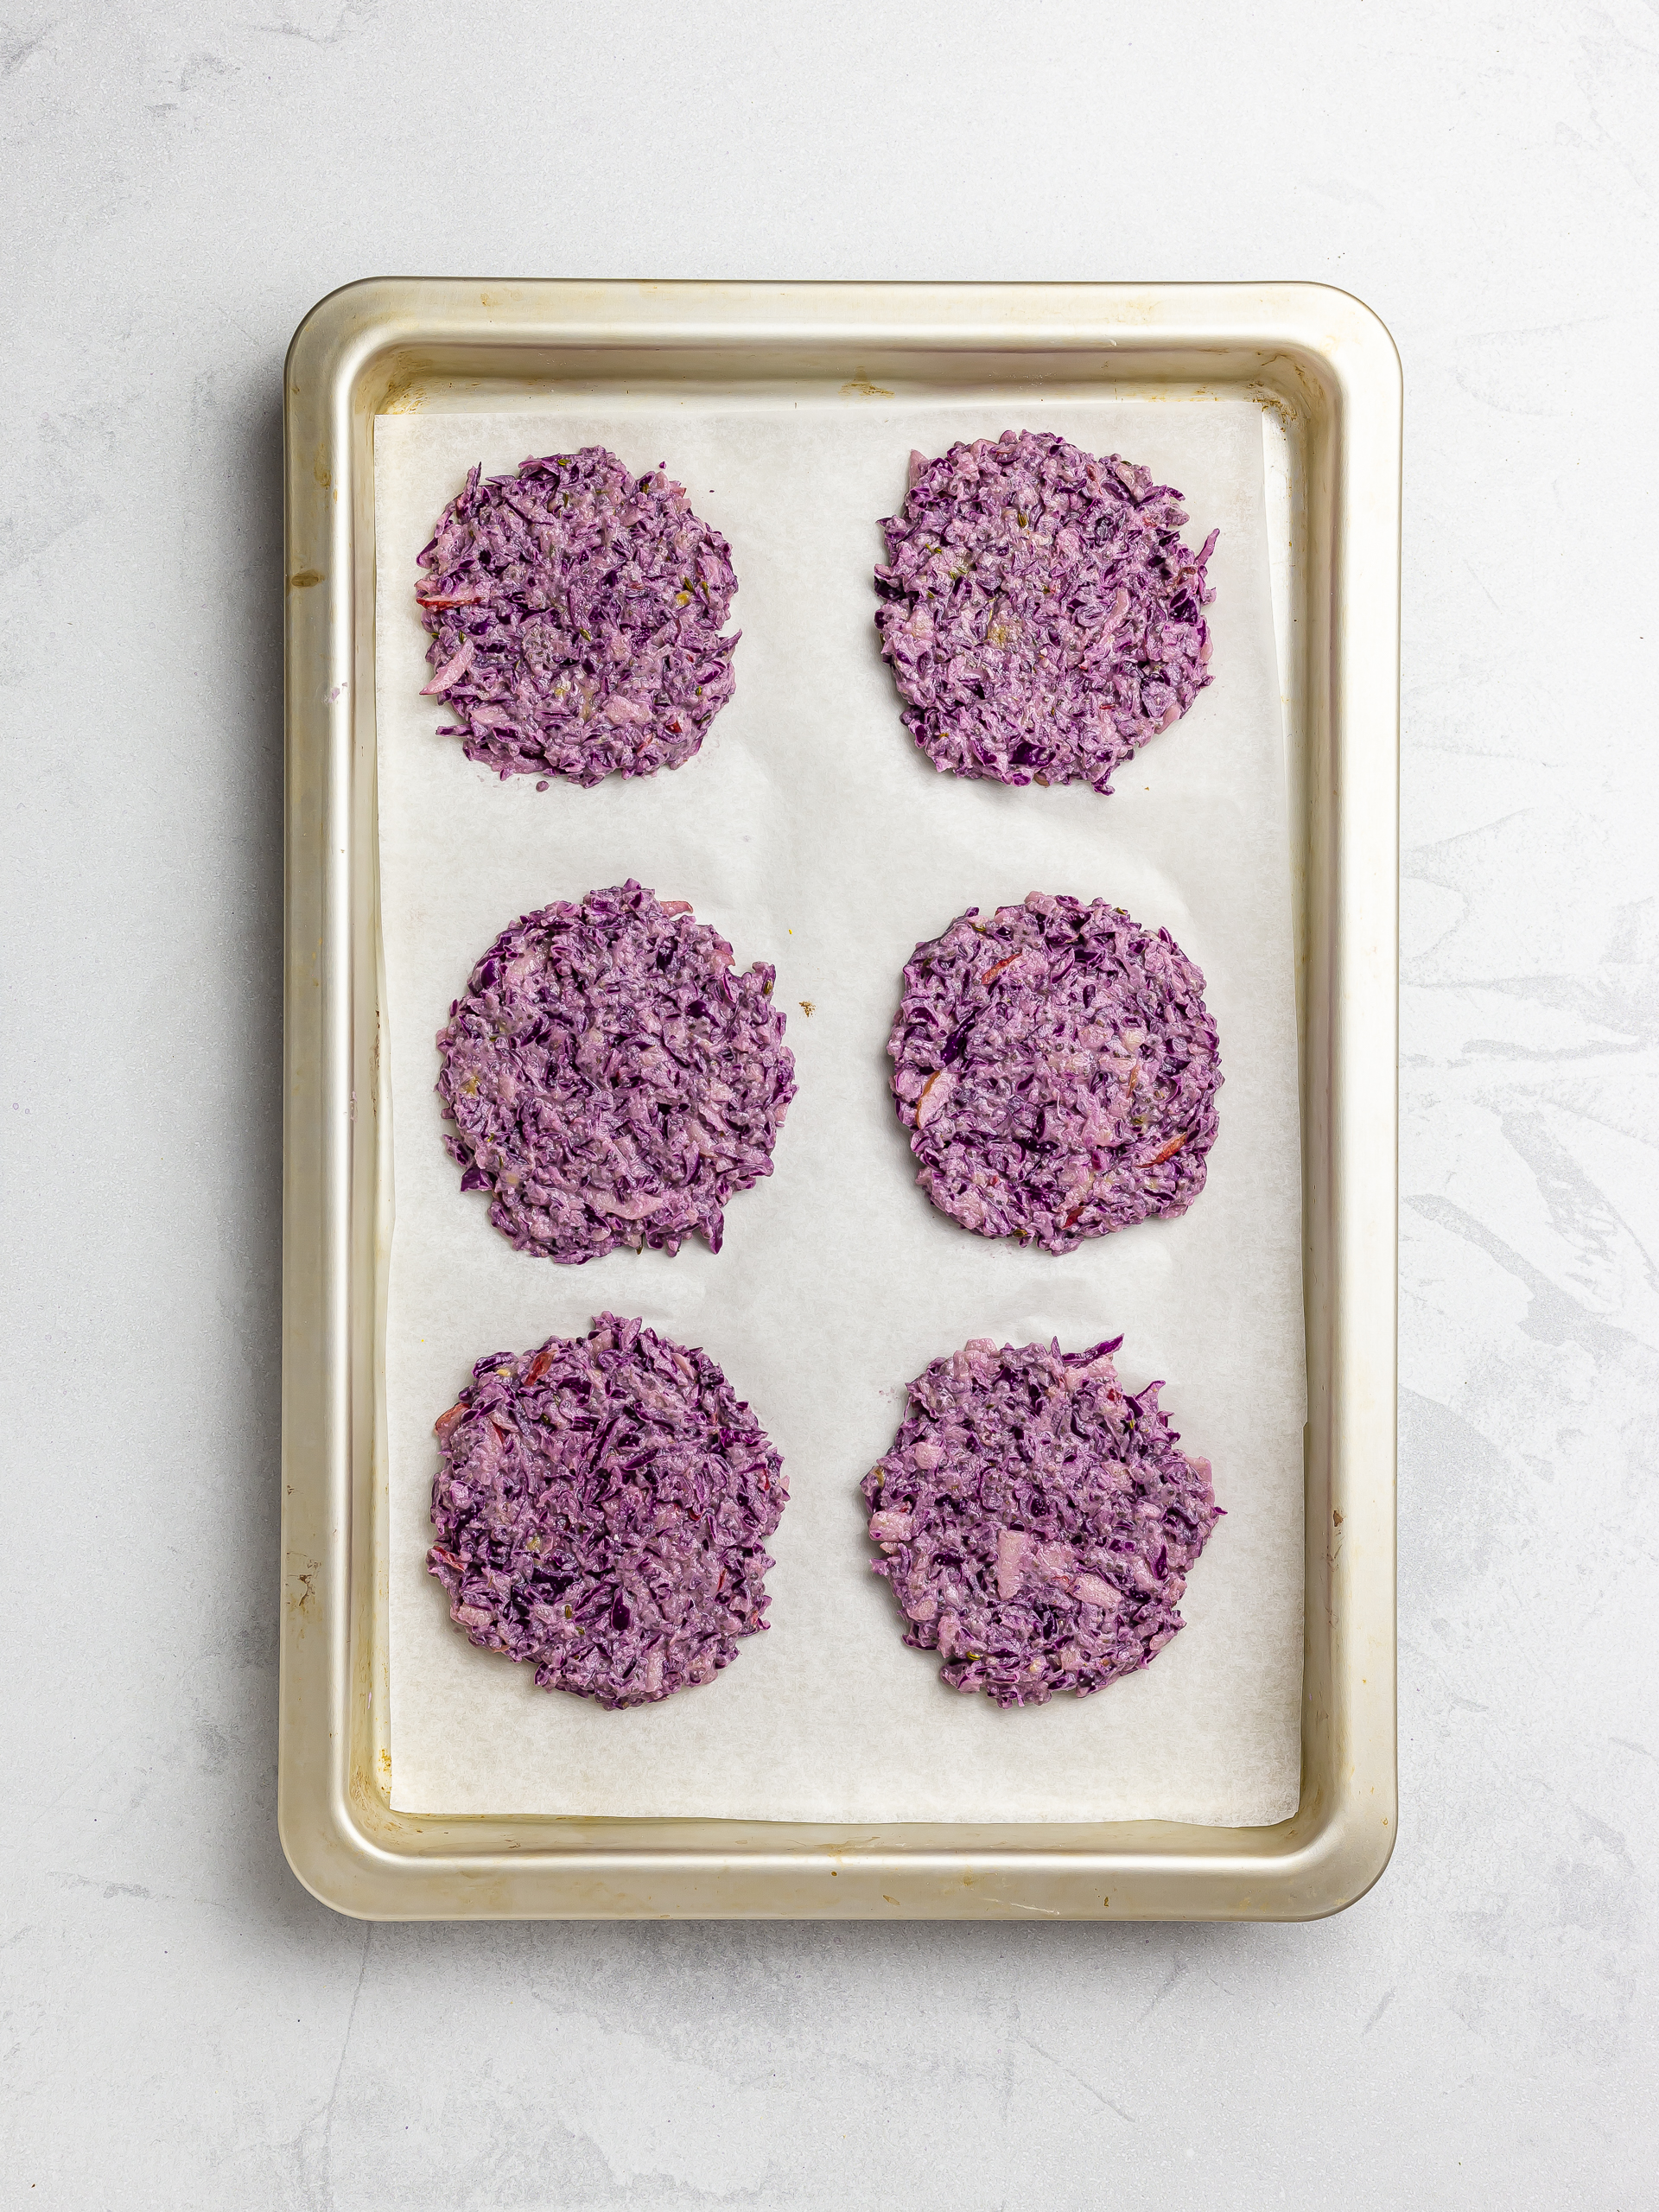 shaped red cabbage fritters on a baking tray